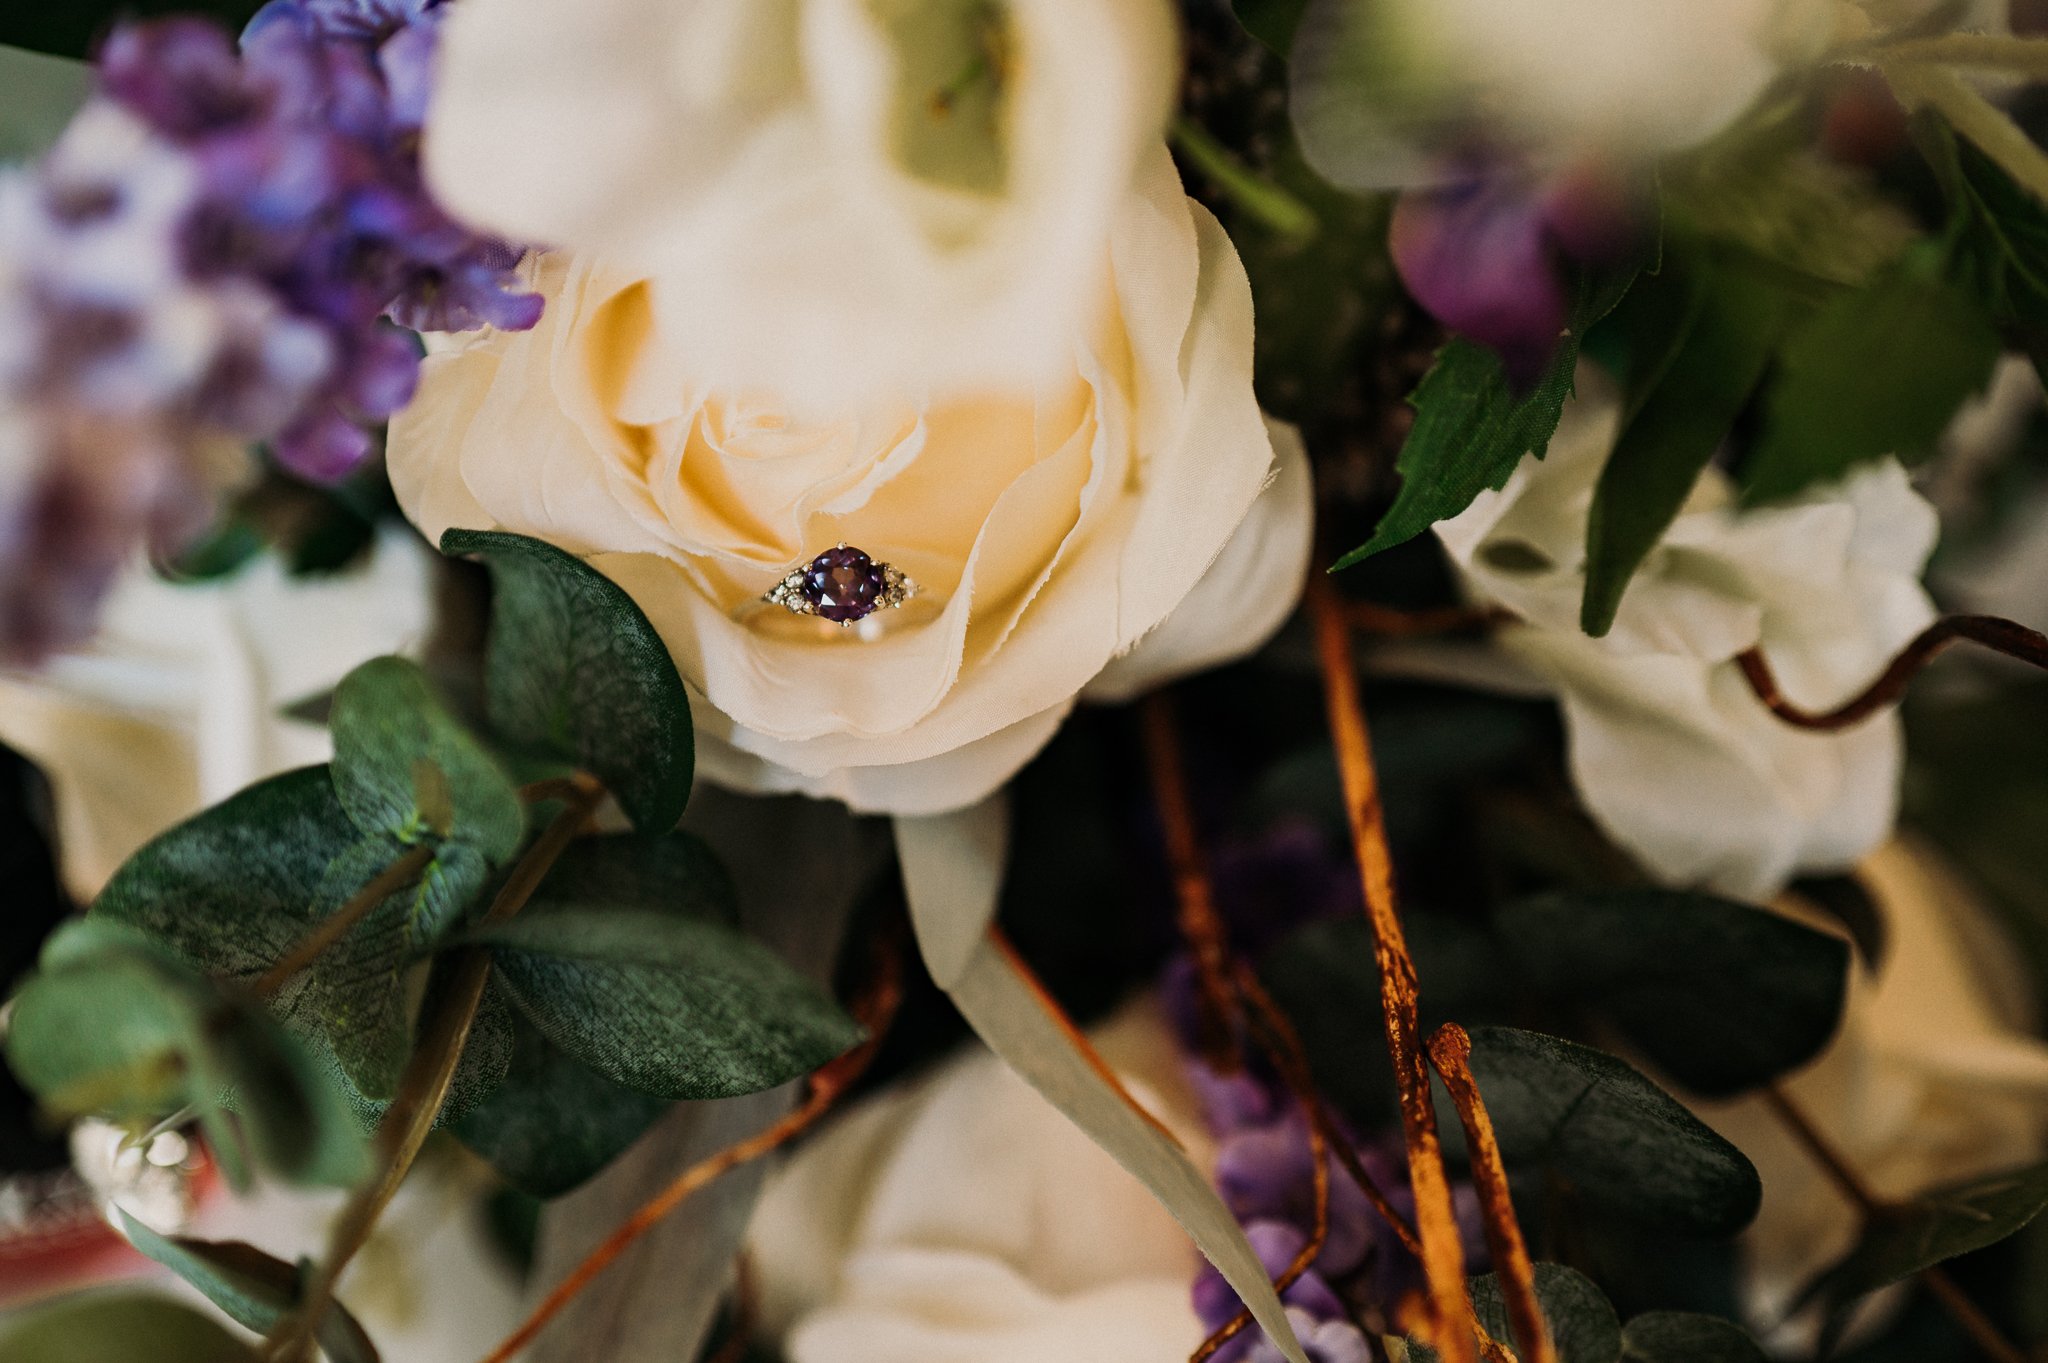 The engagement ring nestled amongst the petals of a rose in the brides bouquet at Sneaton Castle, Whitby.